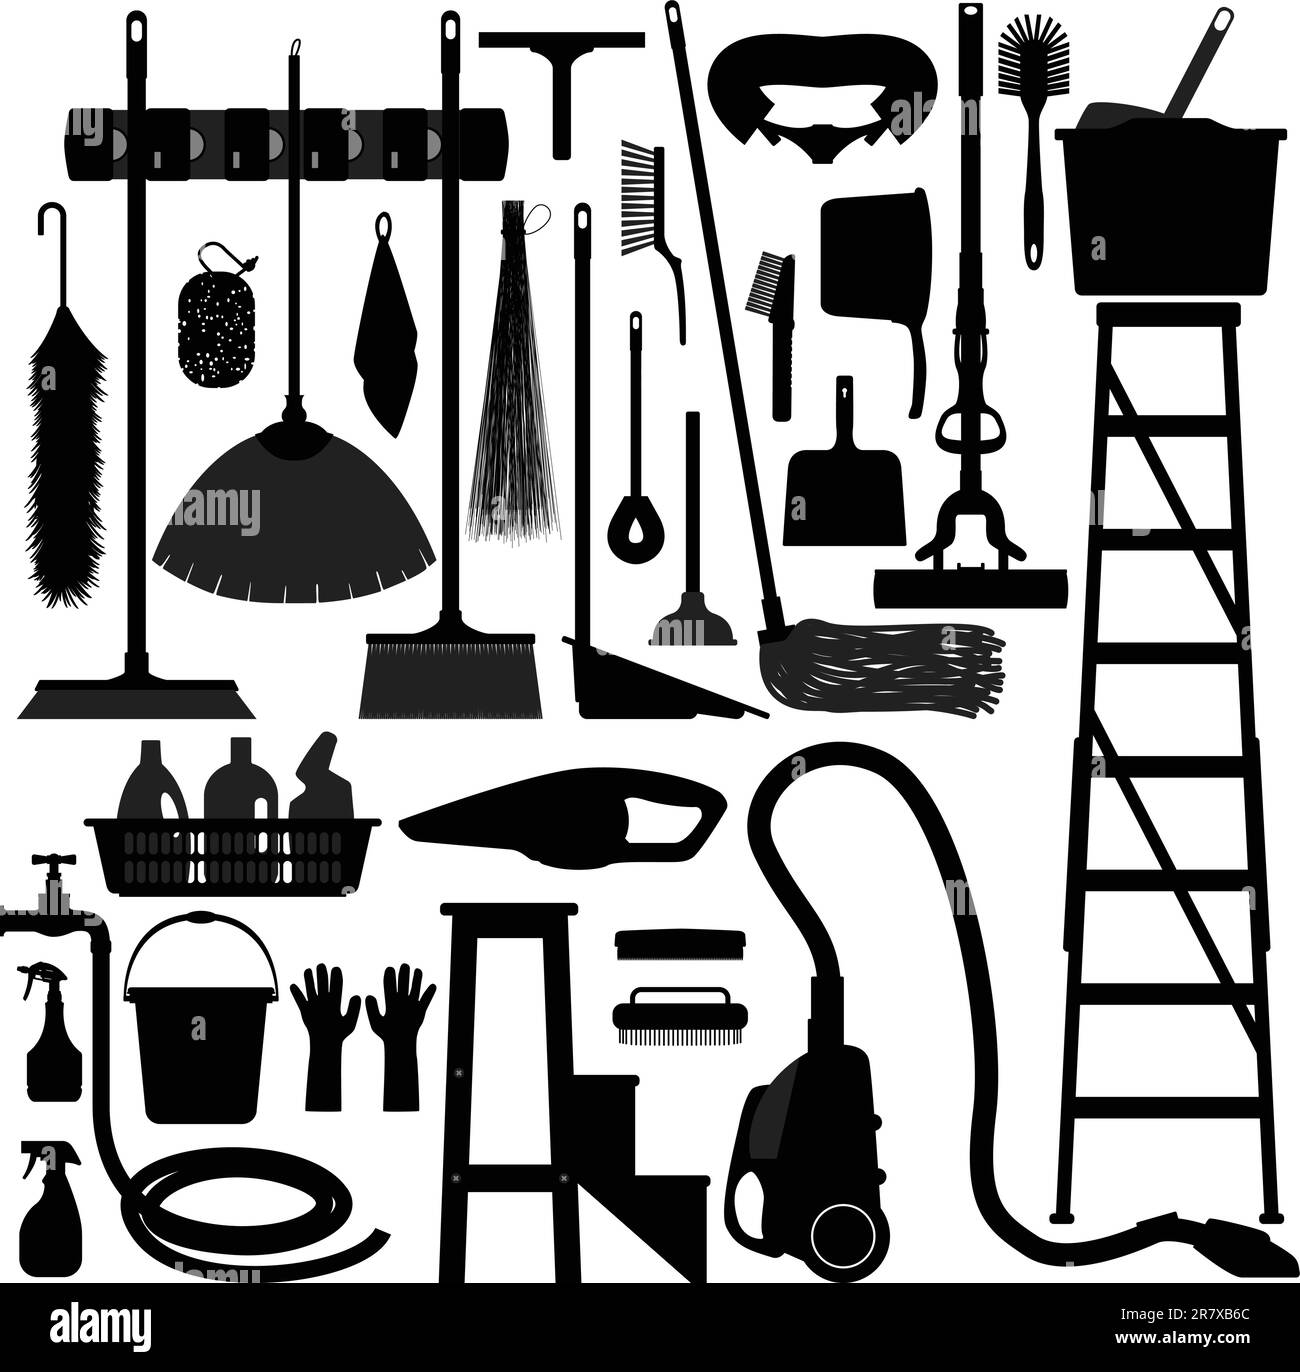 A set of domestic household cleaning and washing equipment. Stock Vector